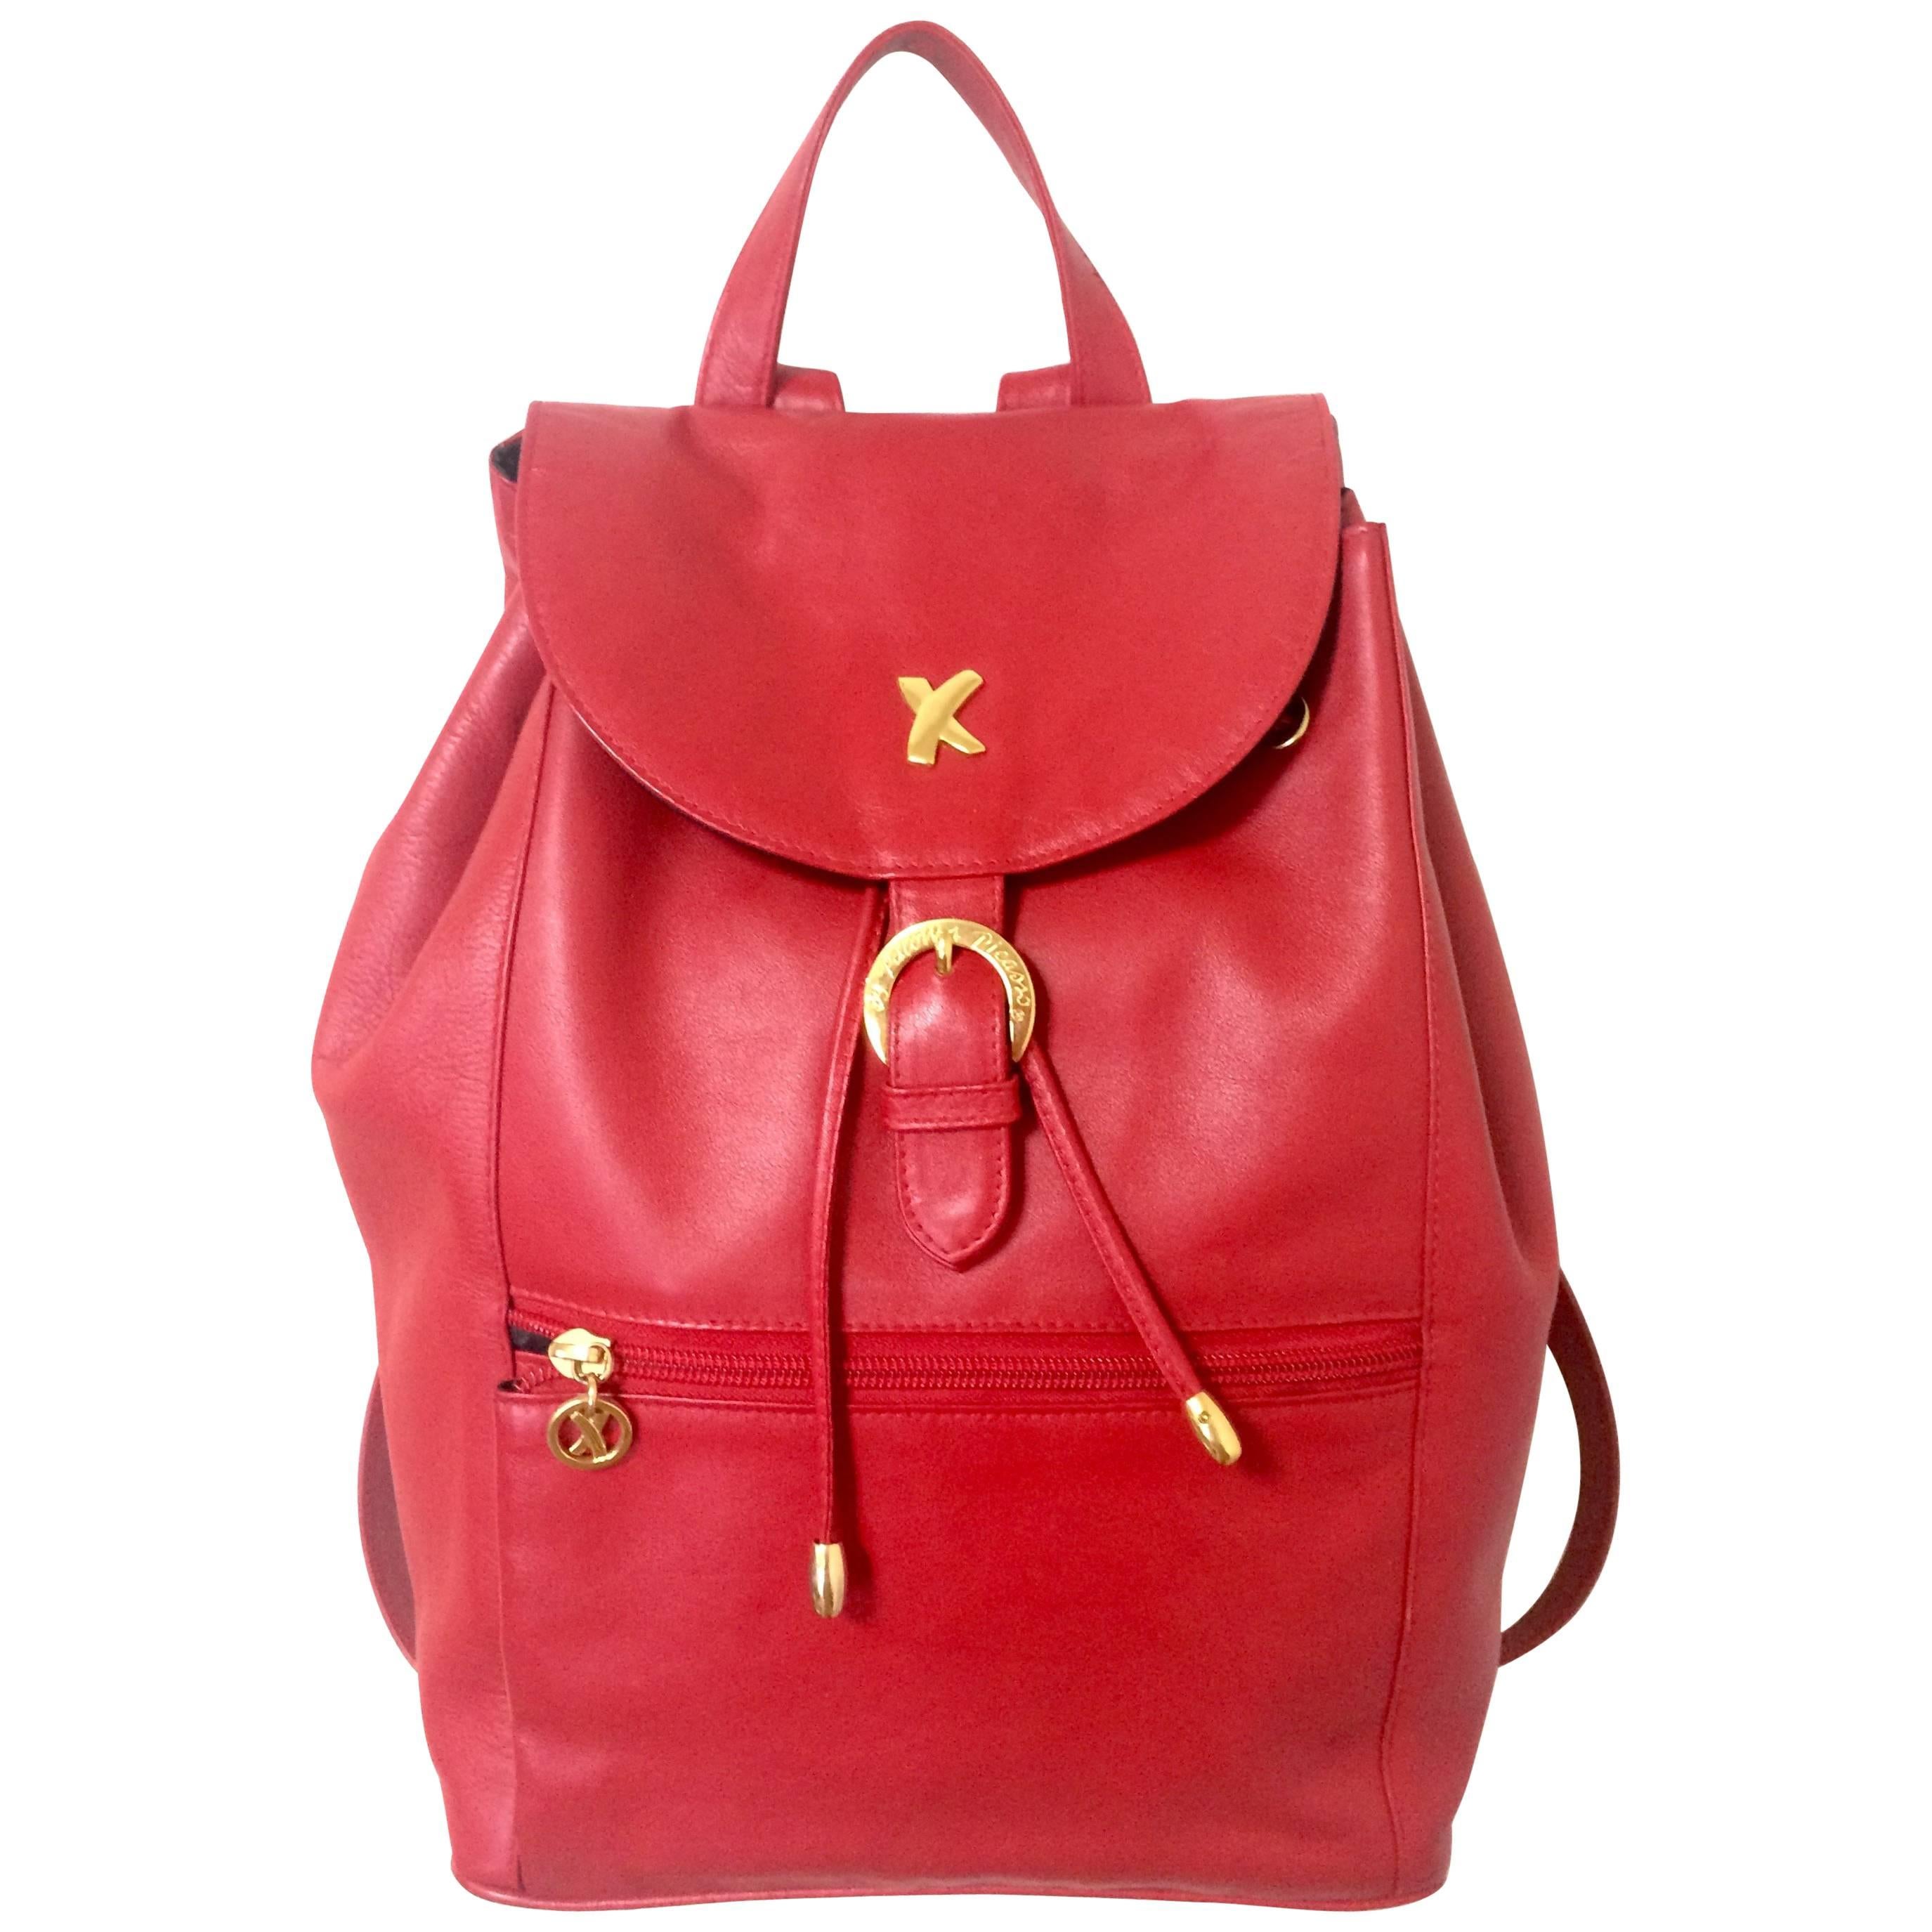 Vintage Paloma Picasso red leather backpack with golden logo motifs. Classic bag